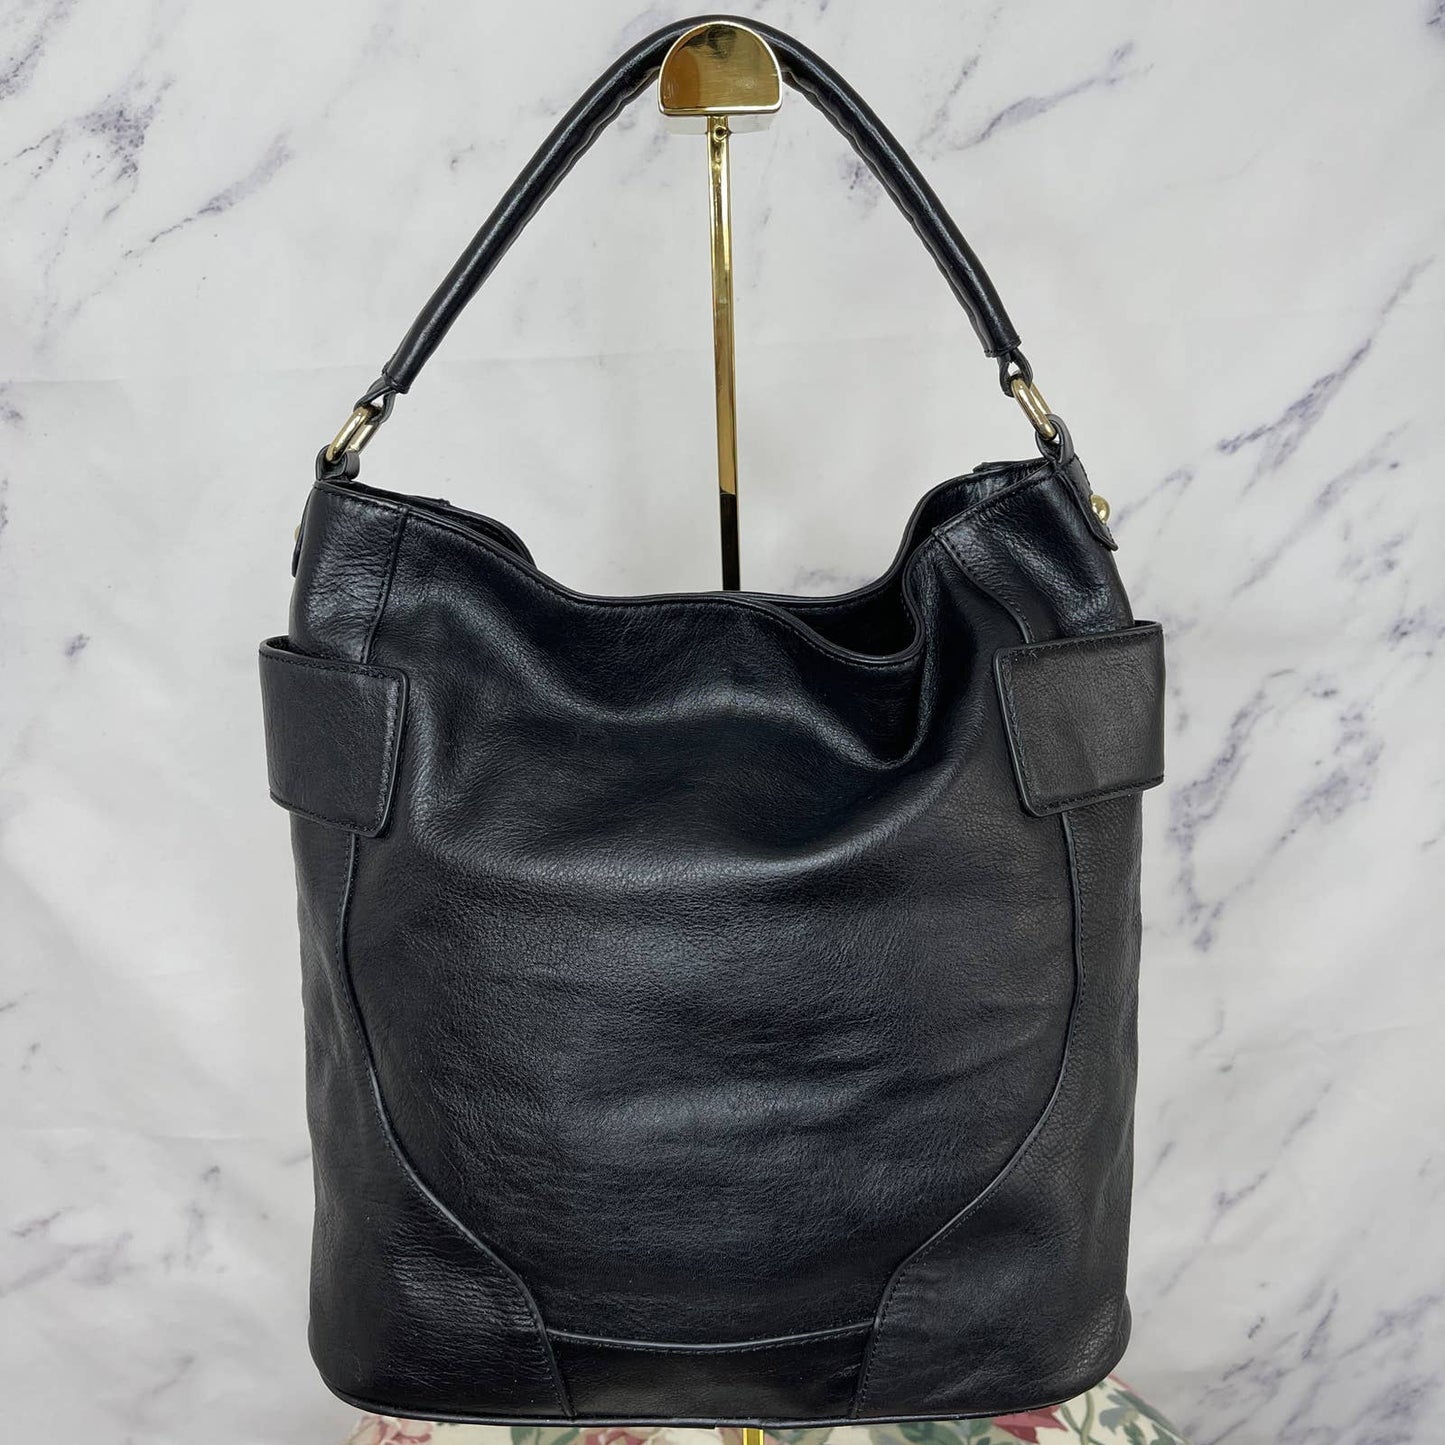 Juicy Couture | Black Leather Shopper Tote